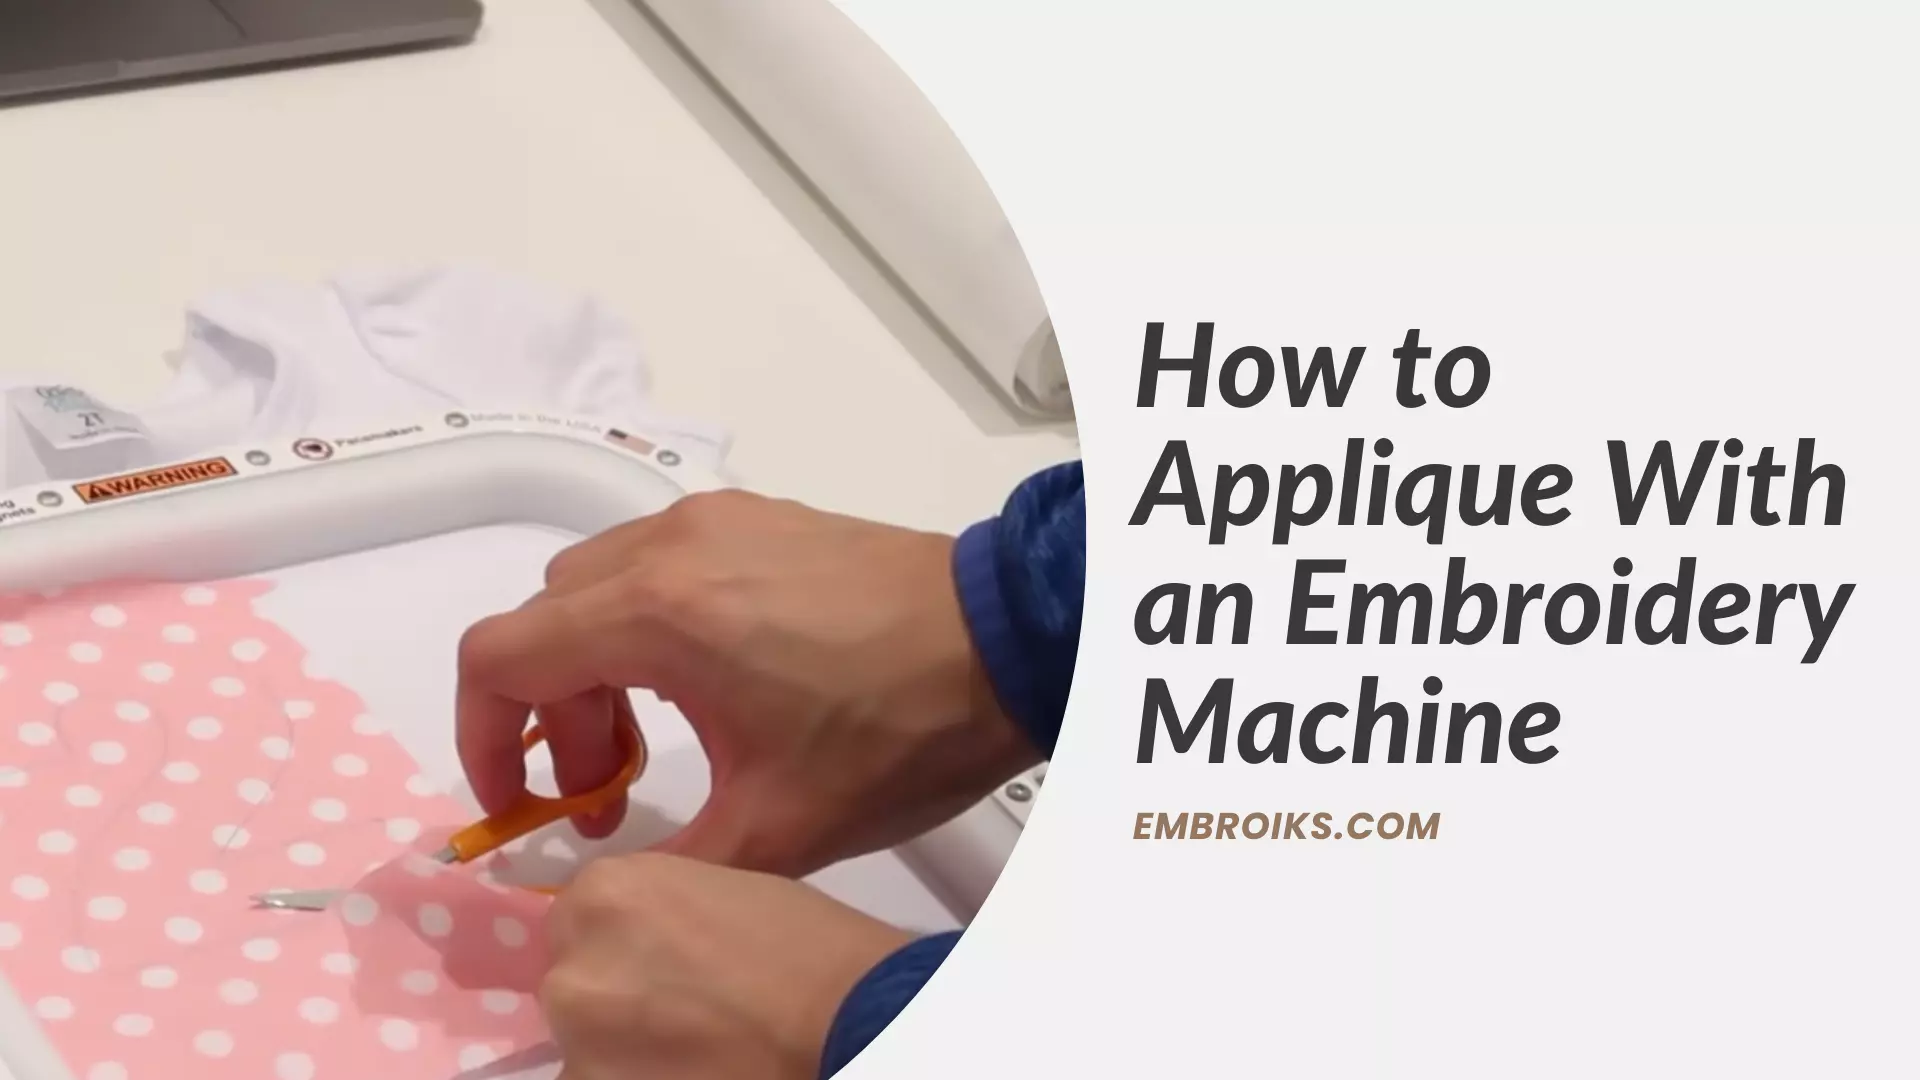 How to Applique With an Embroidery Machine